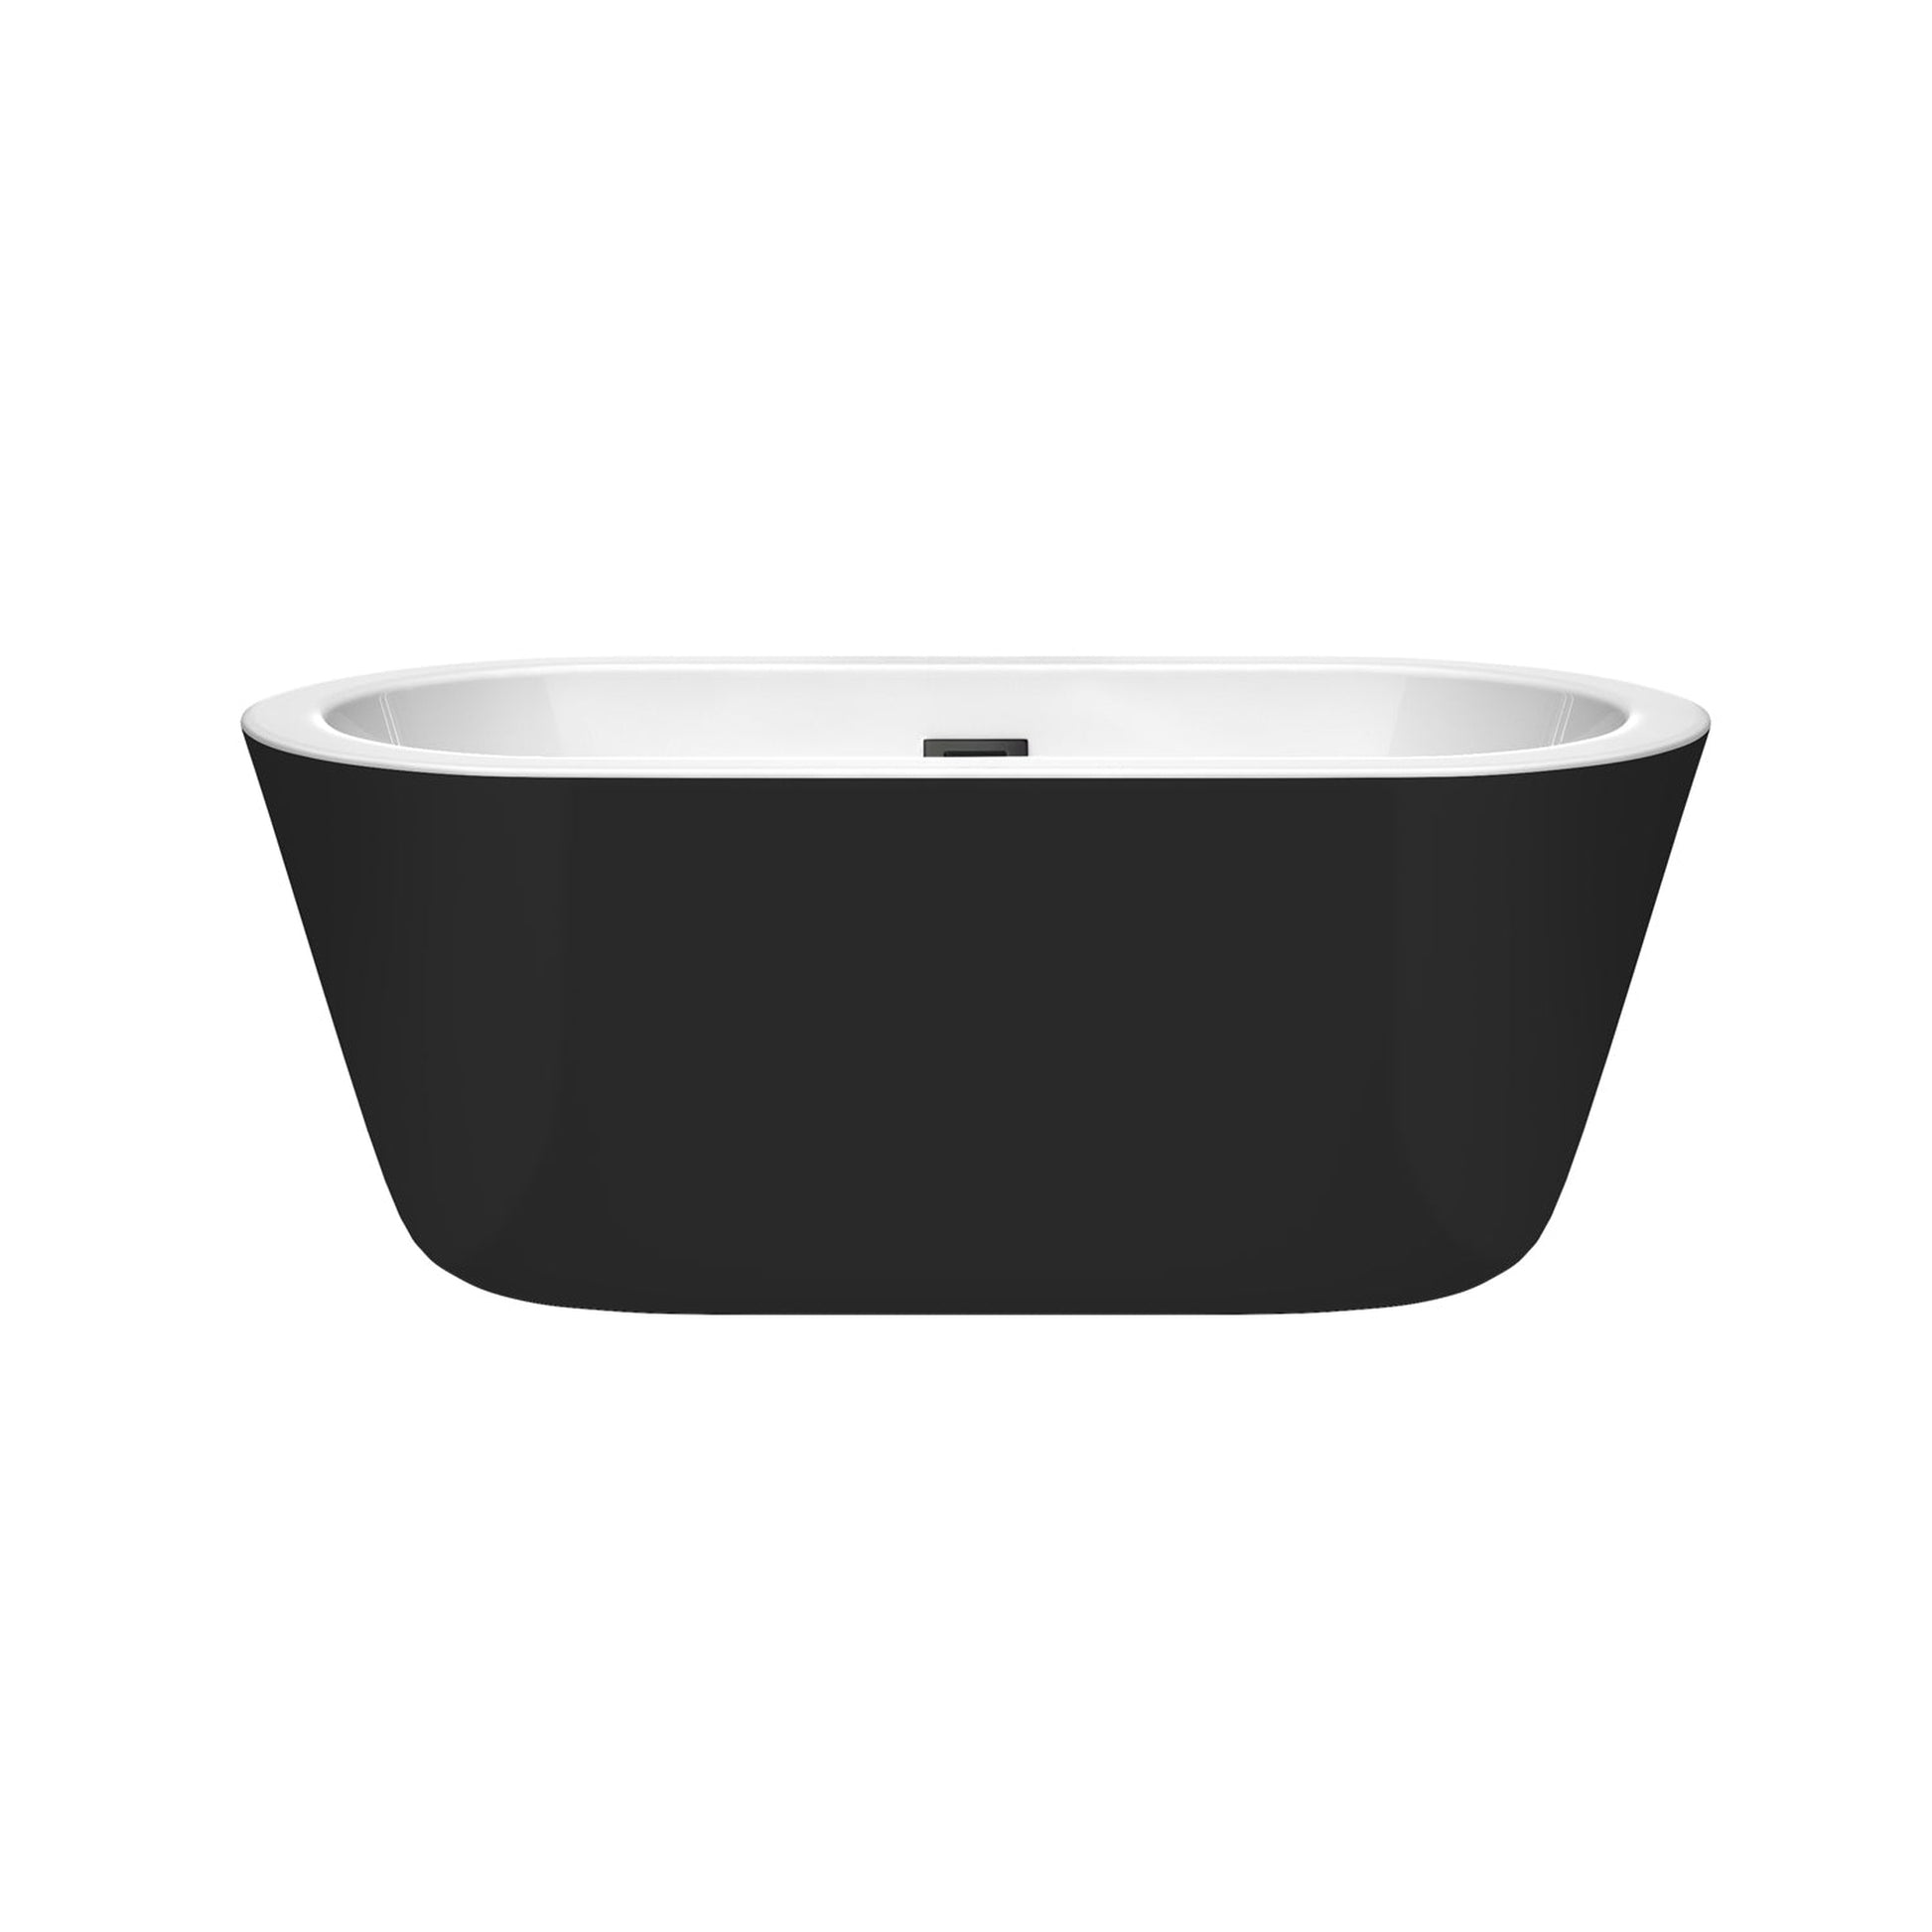 Wyndham Collection Mermaid 60" Freestanding Bathtub in Black With White Interior With Matte Black Drain and Overflow Trim